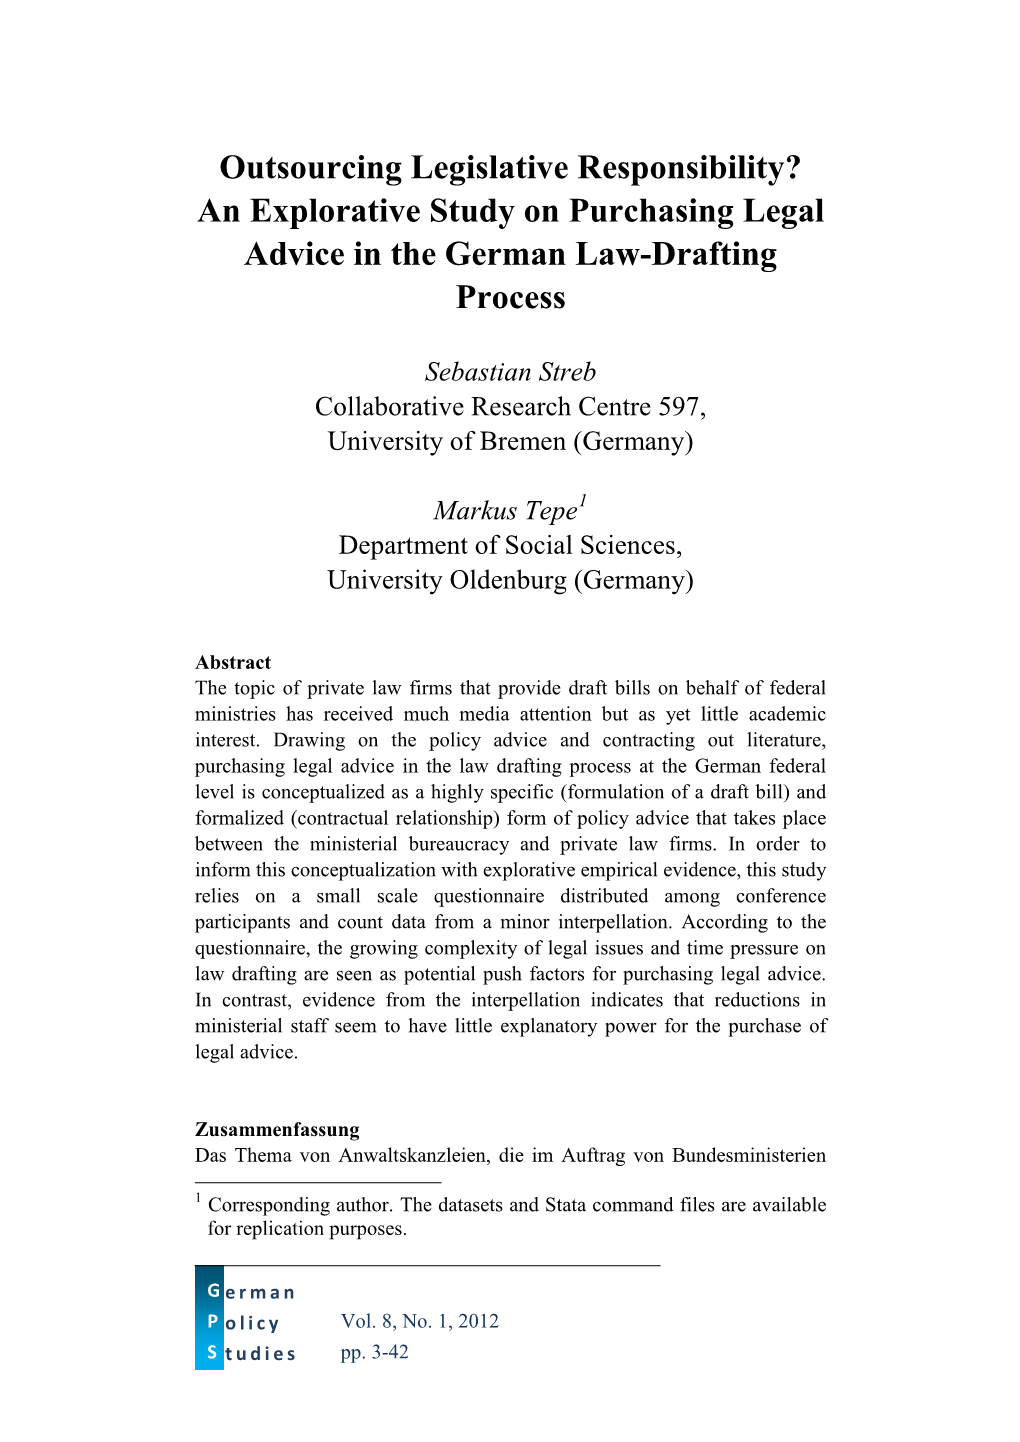 Outsourcing Legislative Responsibility? an Explorative Study on Purchasing Legal Advice in the German Law-Drafting Process